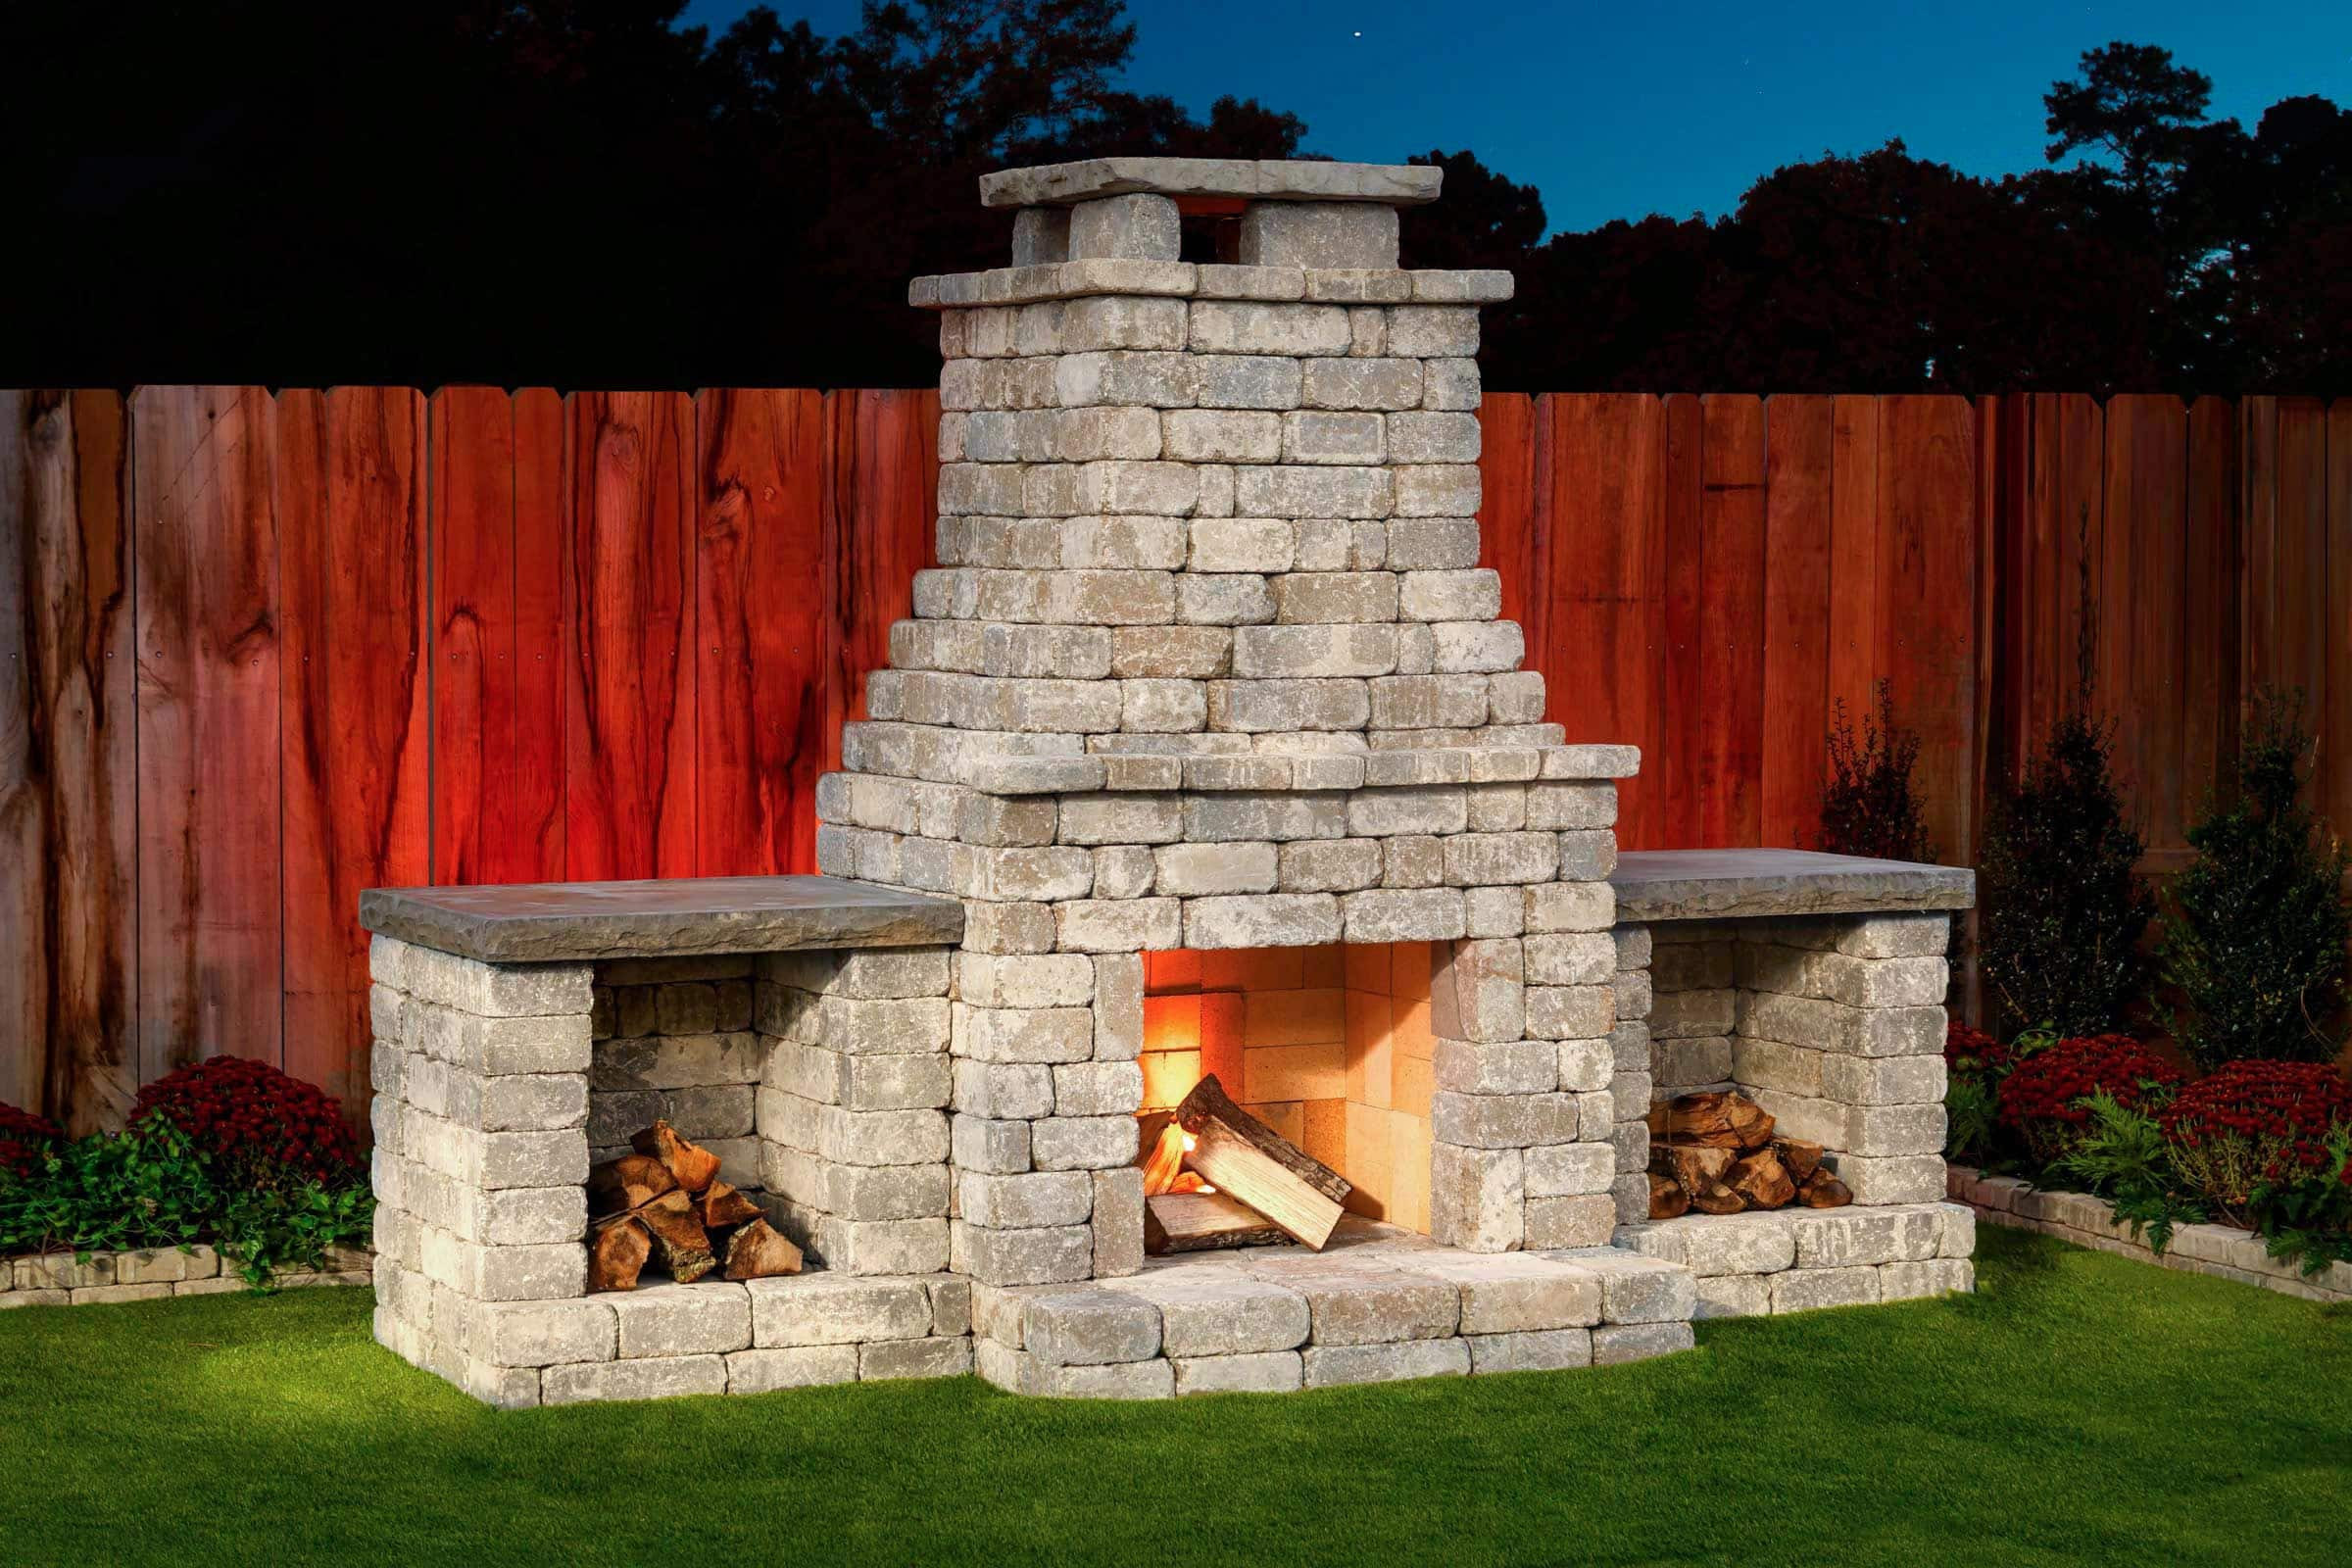 Outdoor Fireplace Kits DIY
 DIY Outdoor Fireplace Kit "Fremont" makes hardscaping